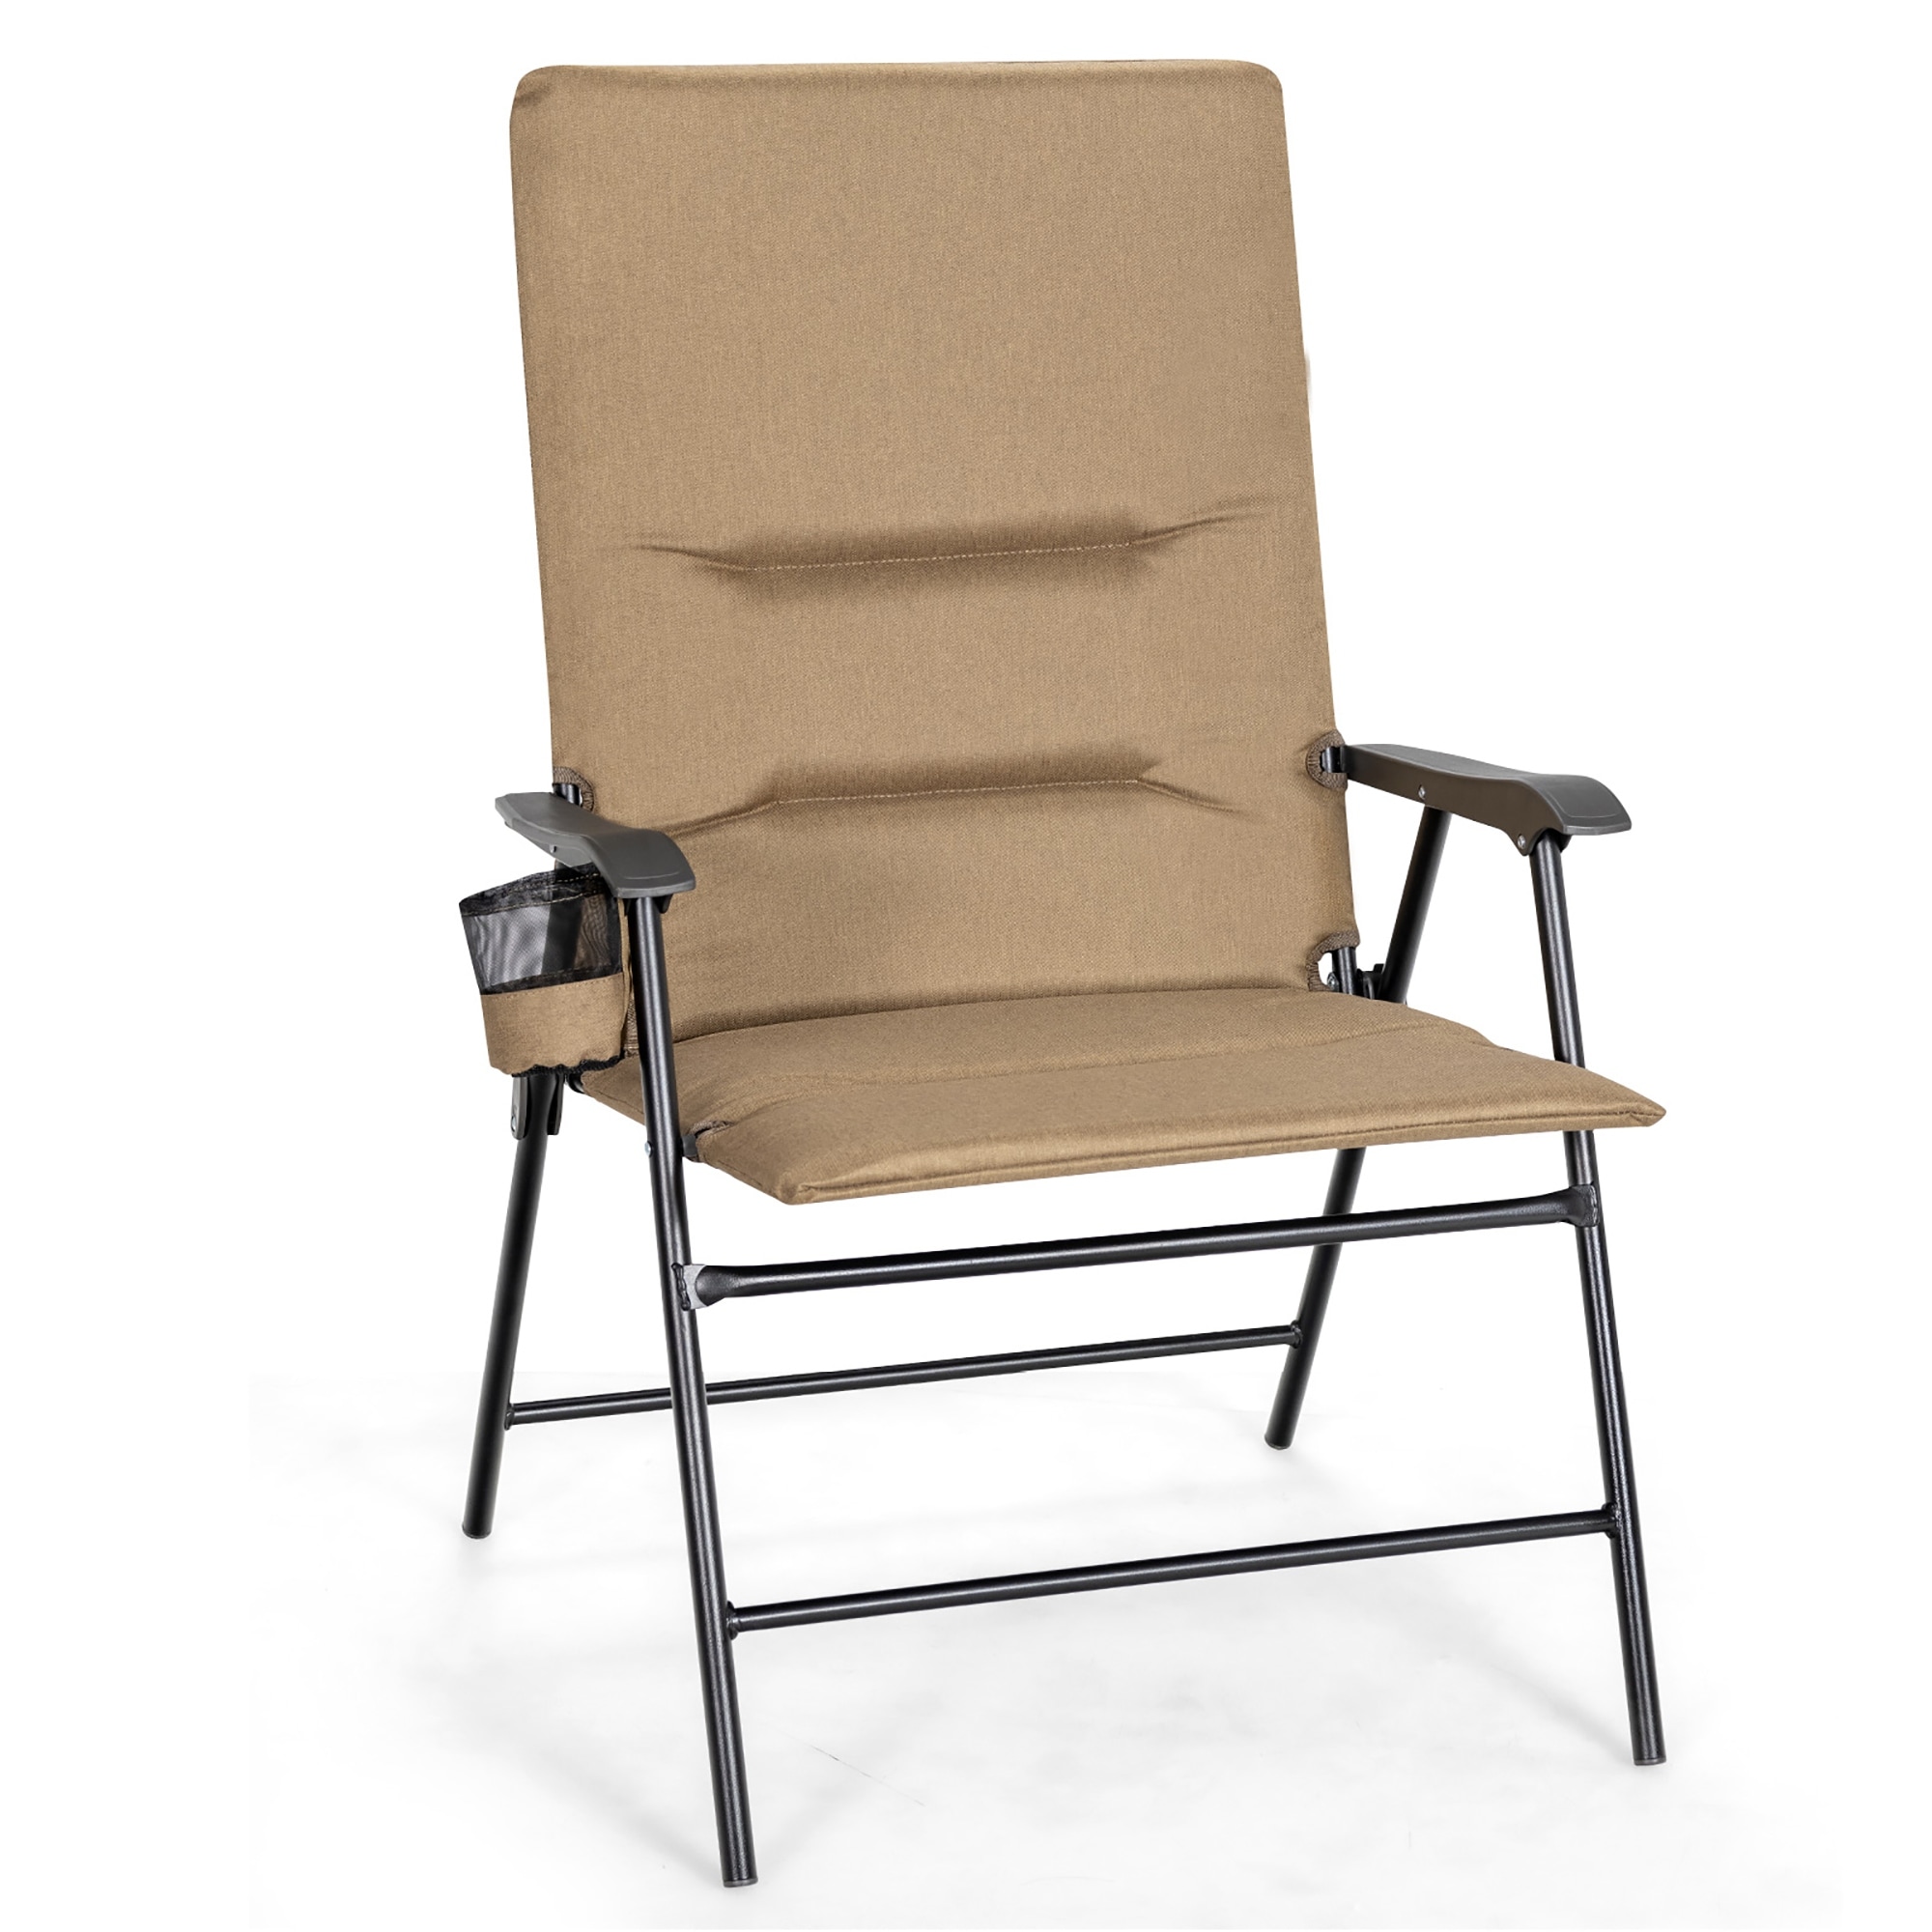 Patio Padded Folding Portable Chair Camping Dining Outdoor Beach Chair